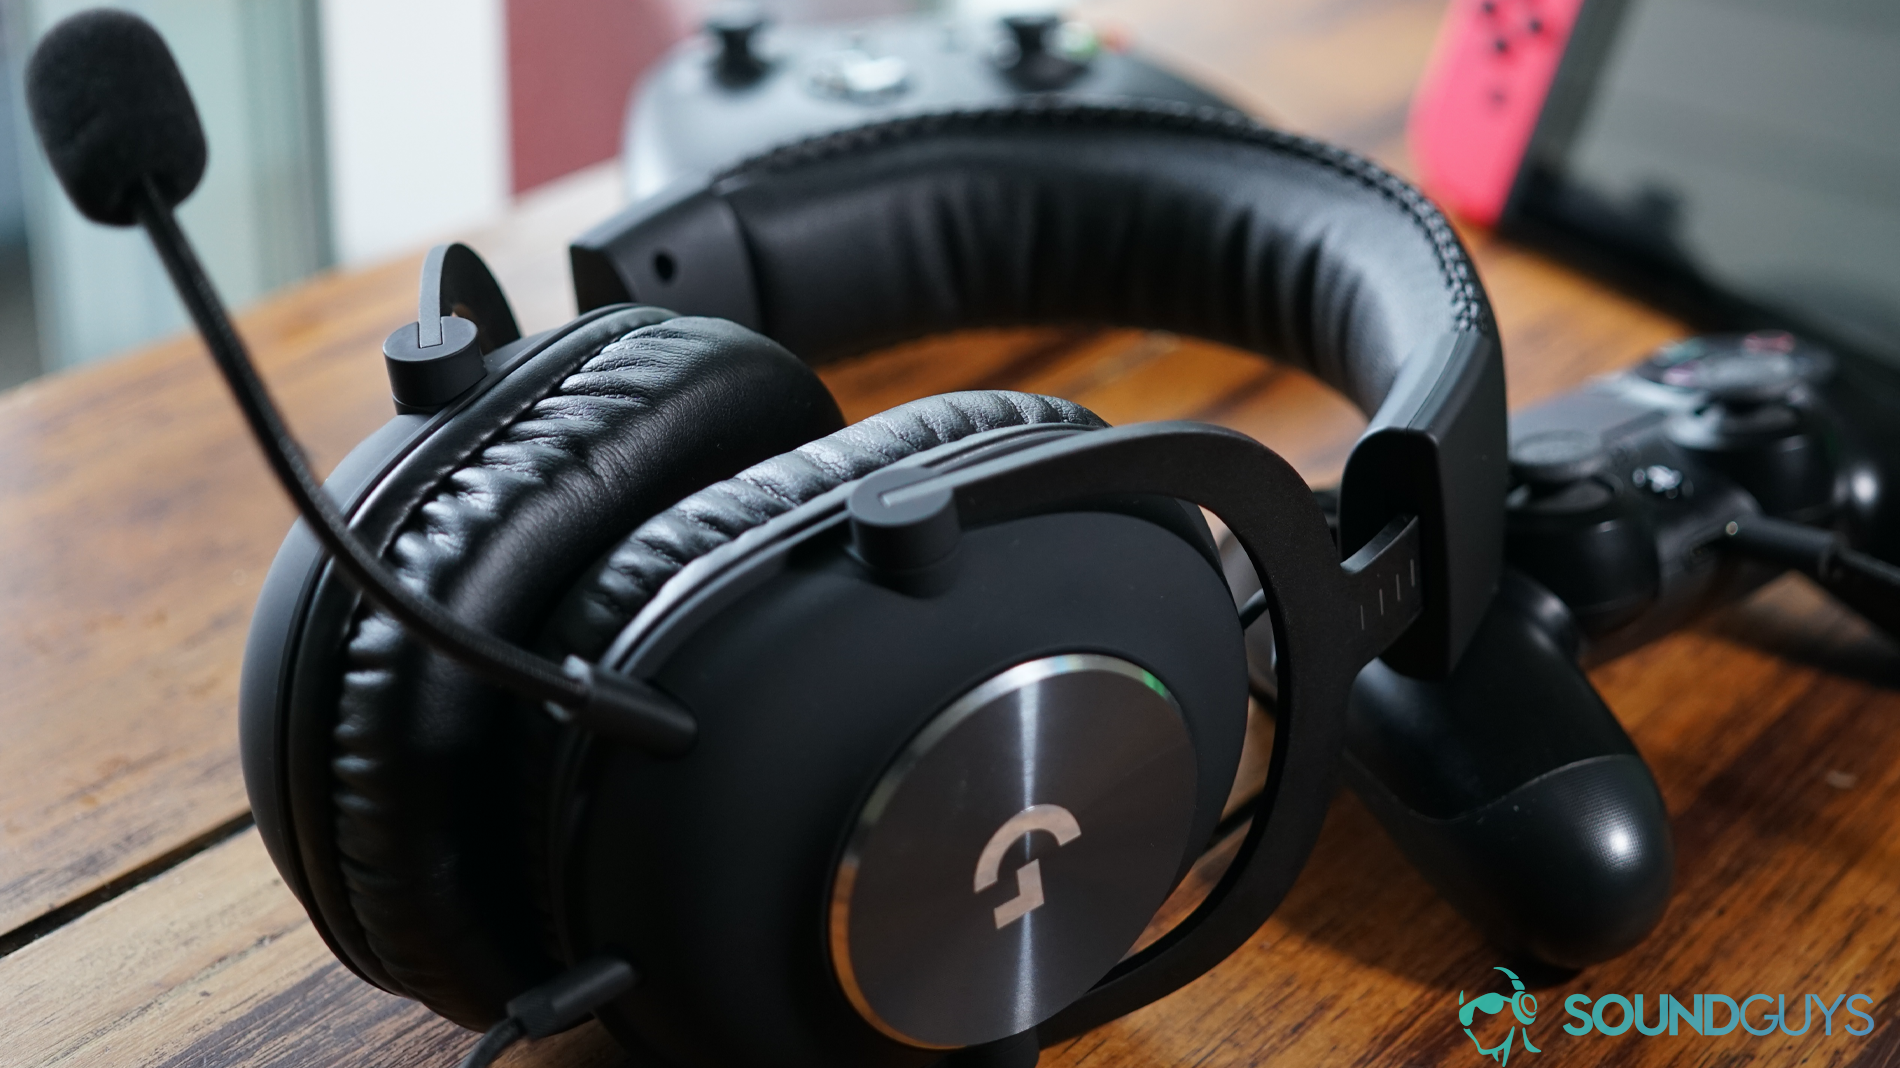 The Logitech G Pro X gaming headset sits on a wooden table in front of a Playstation 4 Dualshock controller, Xbox One controller, and a Nintendo Switch.